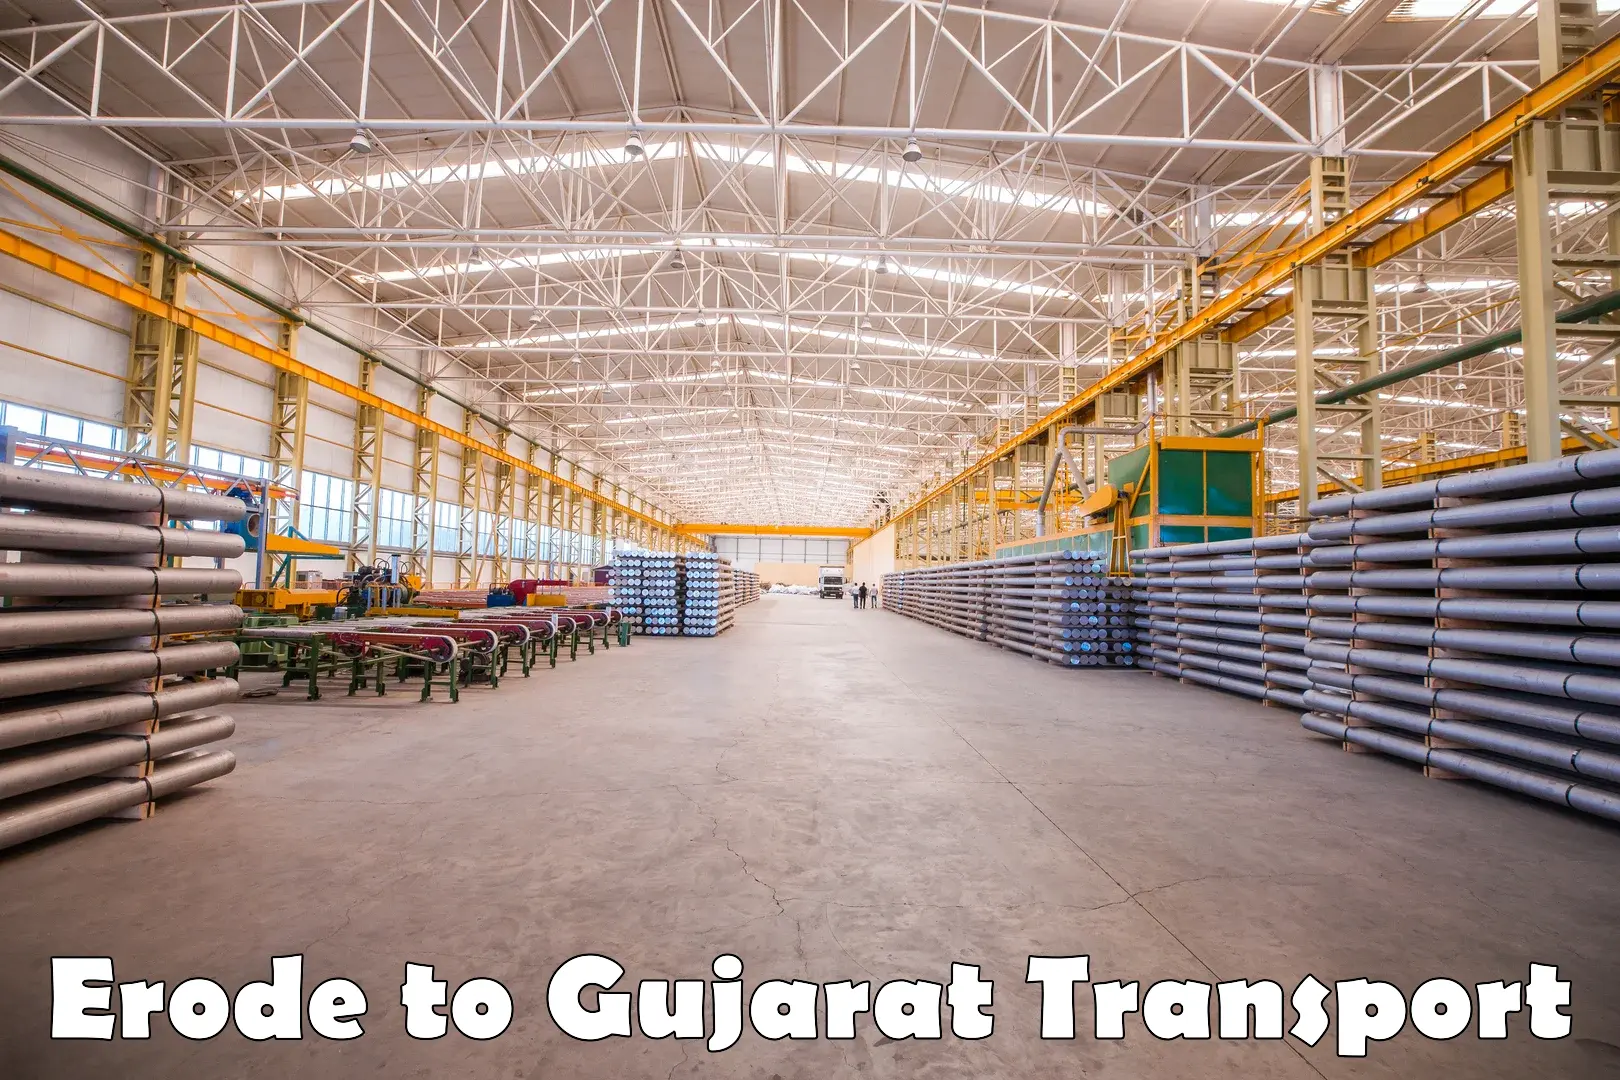 Transport bike from one state to another Erode to Gujarat